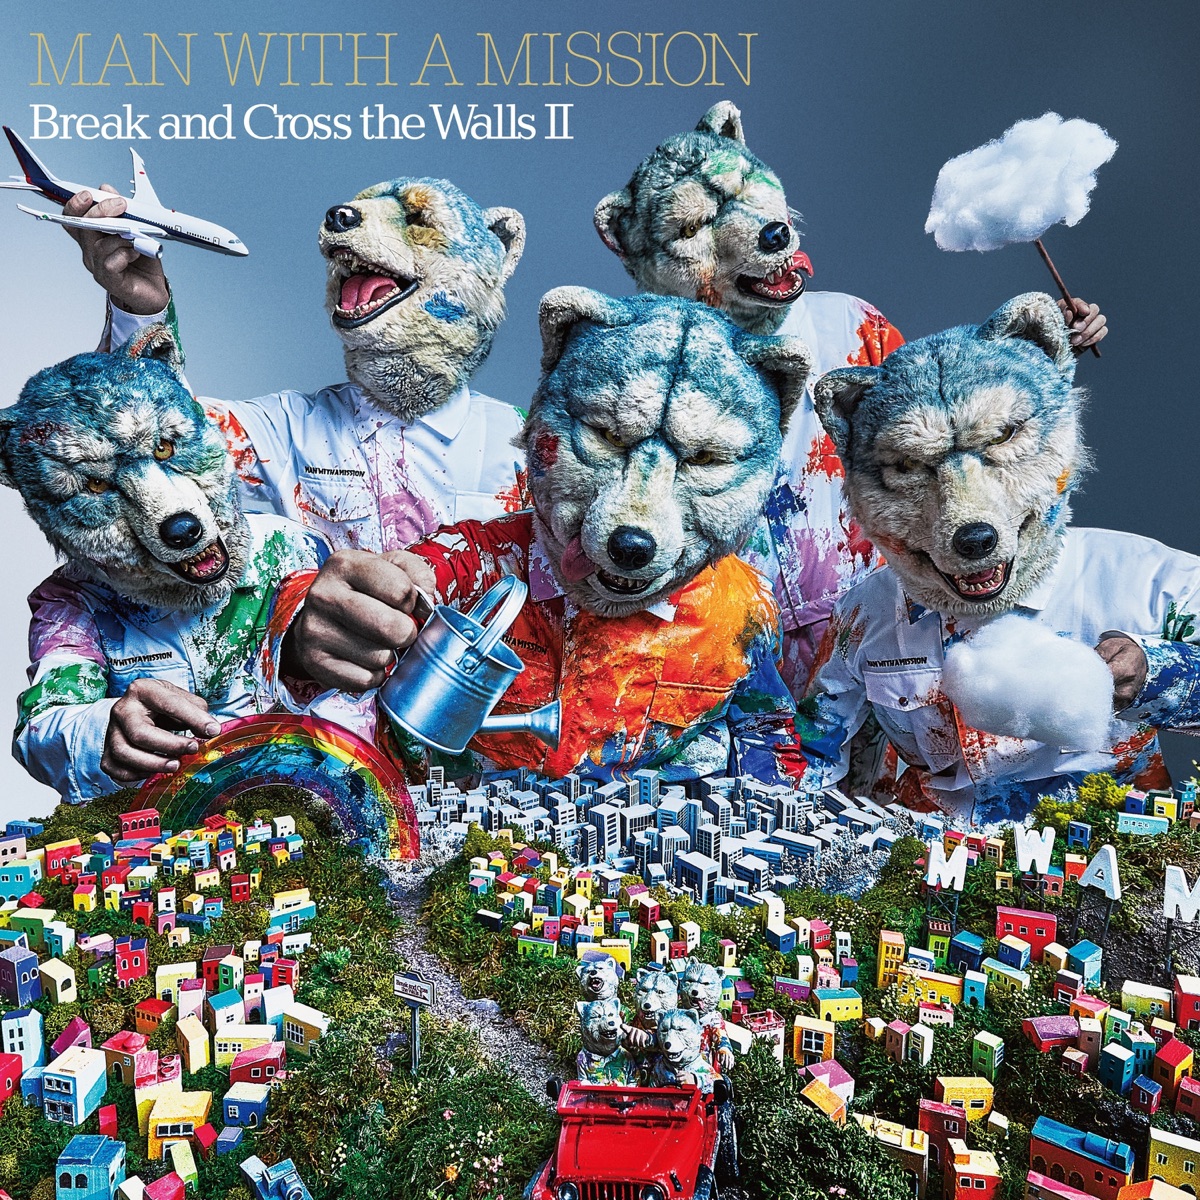 『MAN WITH A MISSION - blue soul 歌詞』収録の『Break and Cross the Walls Ⅱ』ジャケット